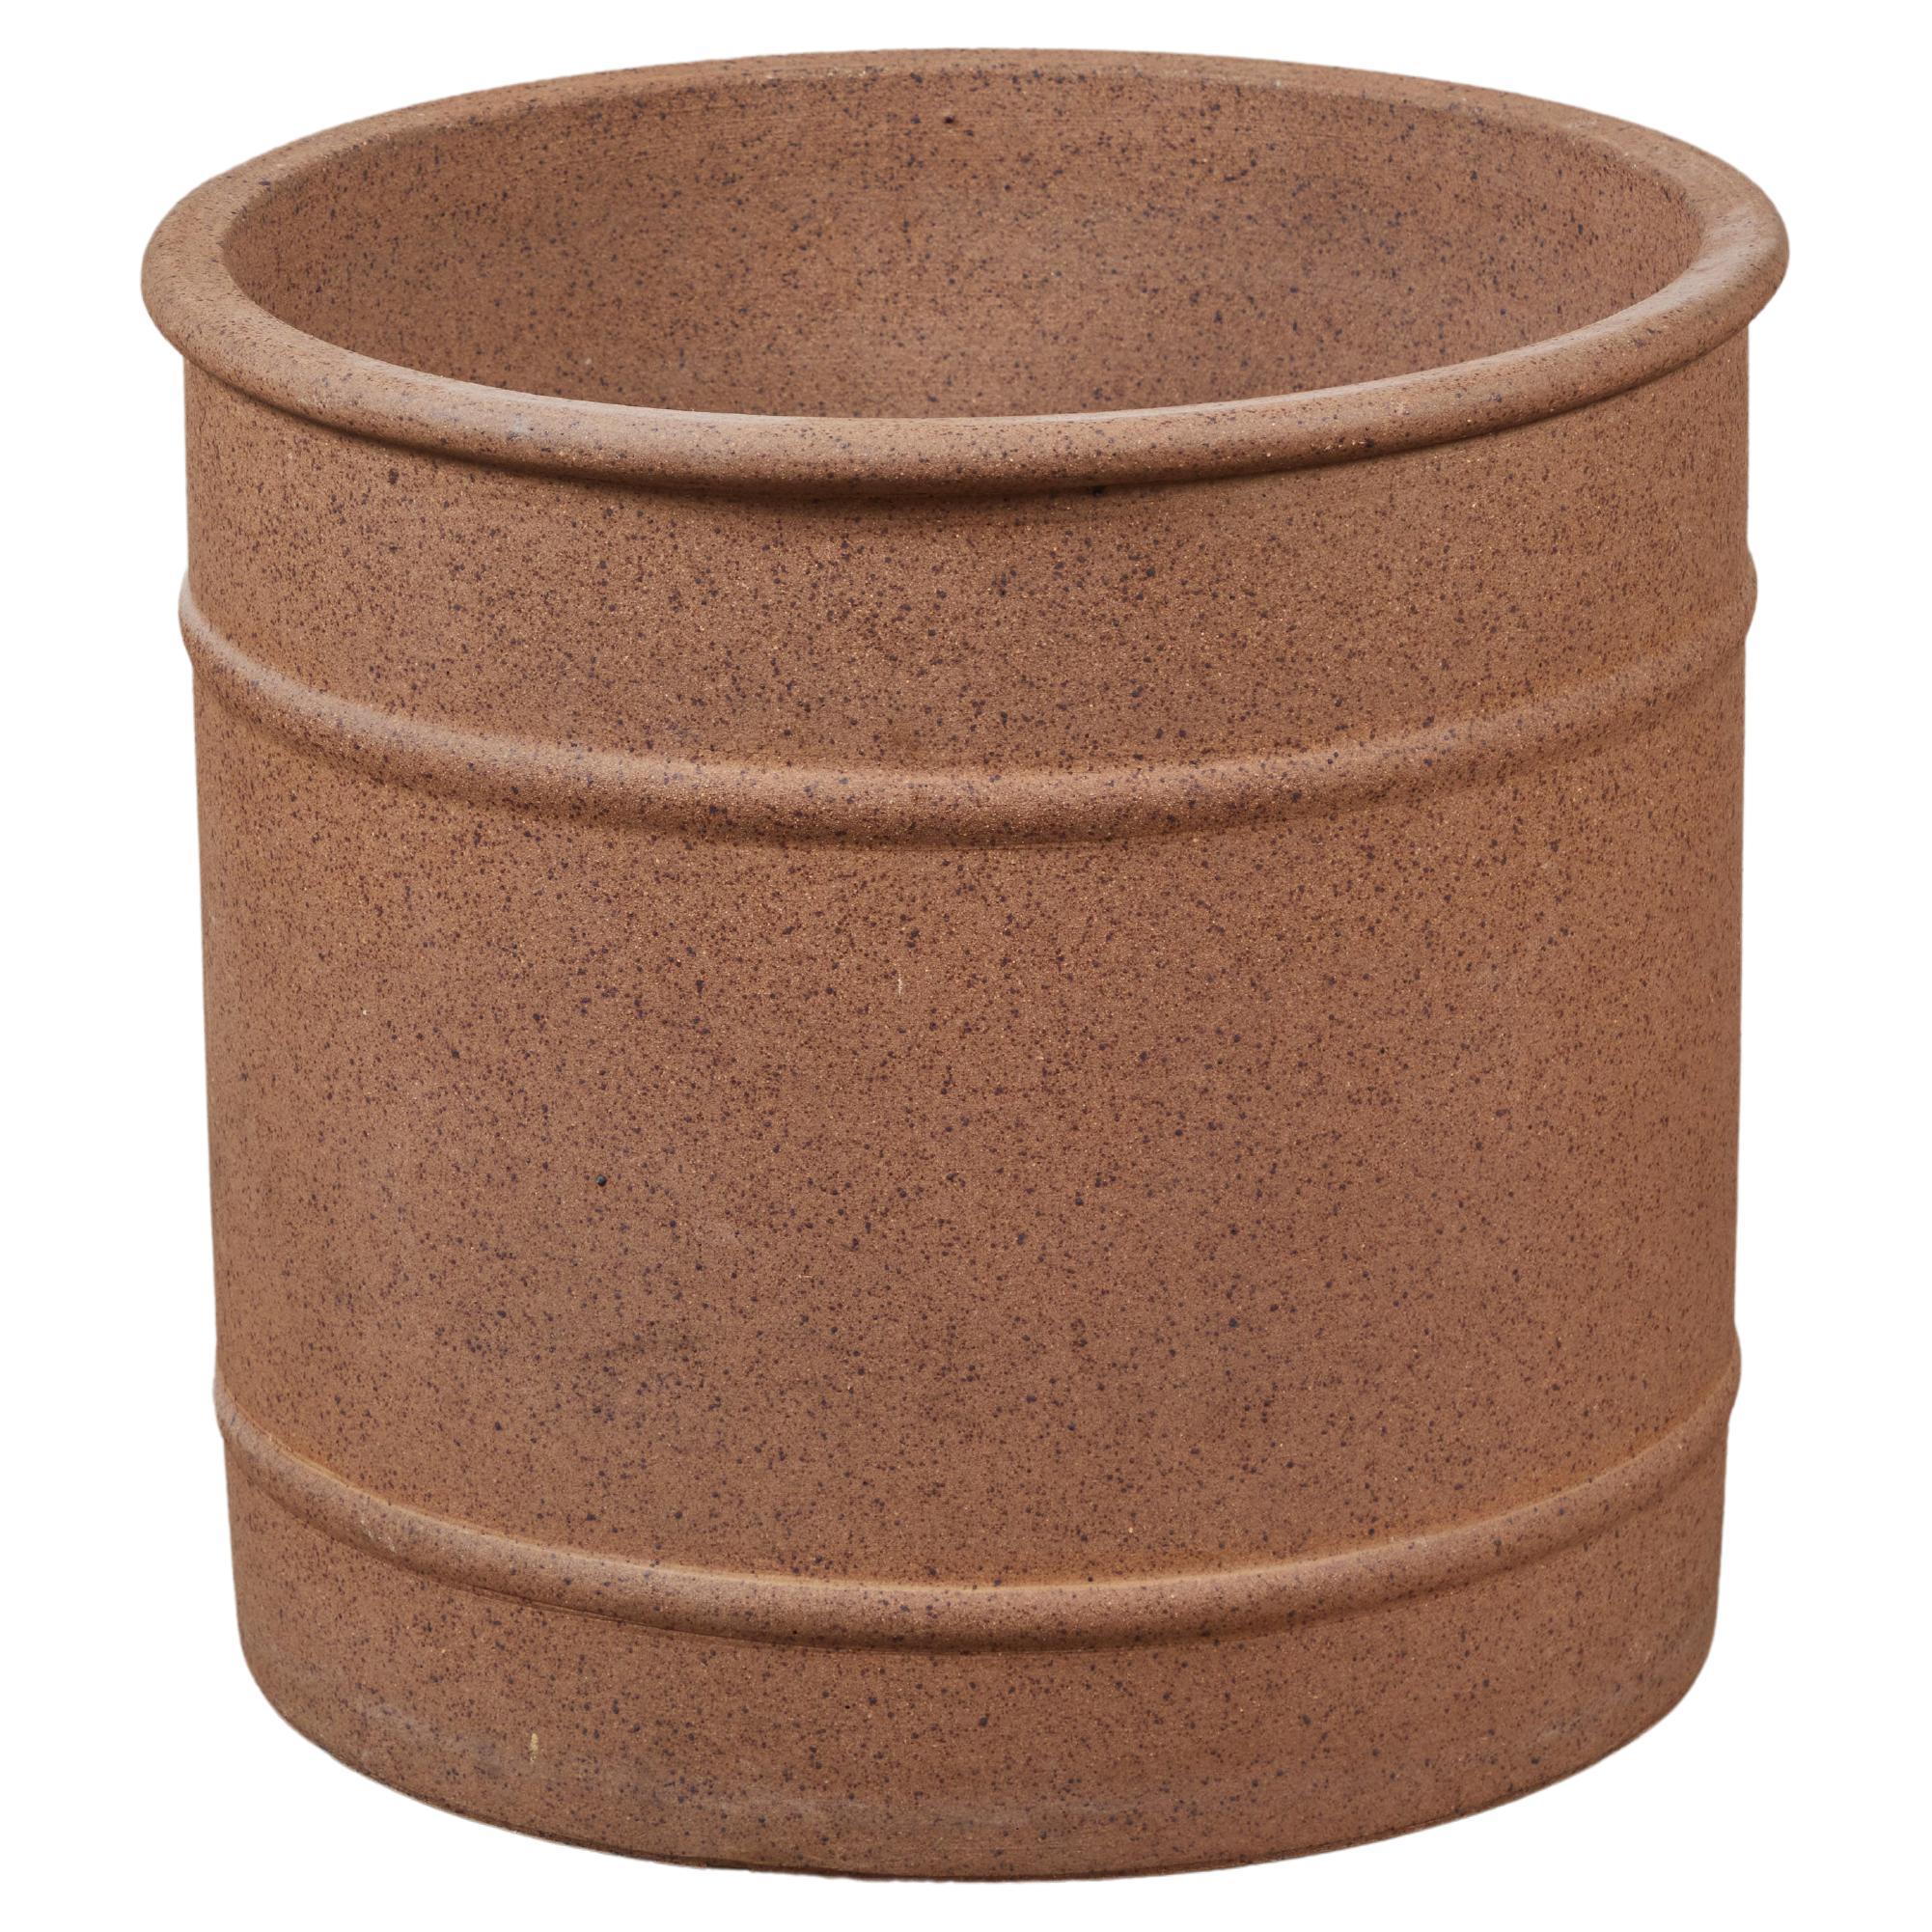 Architectural Pottery "PMC-14" Speckled Stoneware Planter For Sale